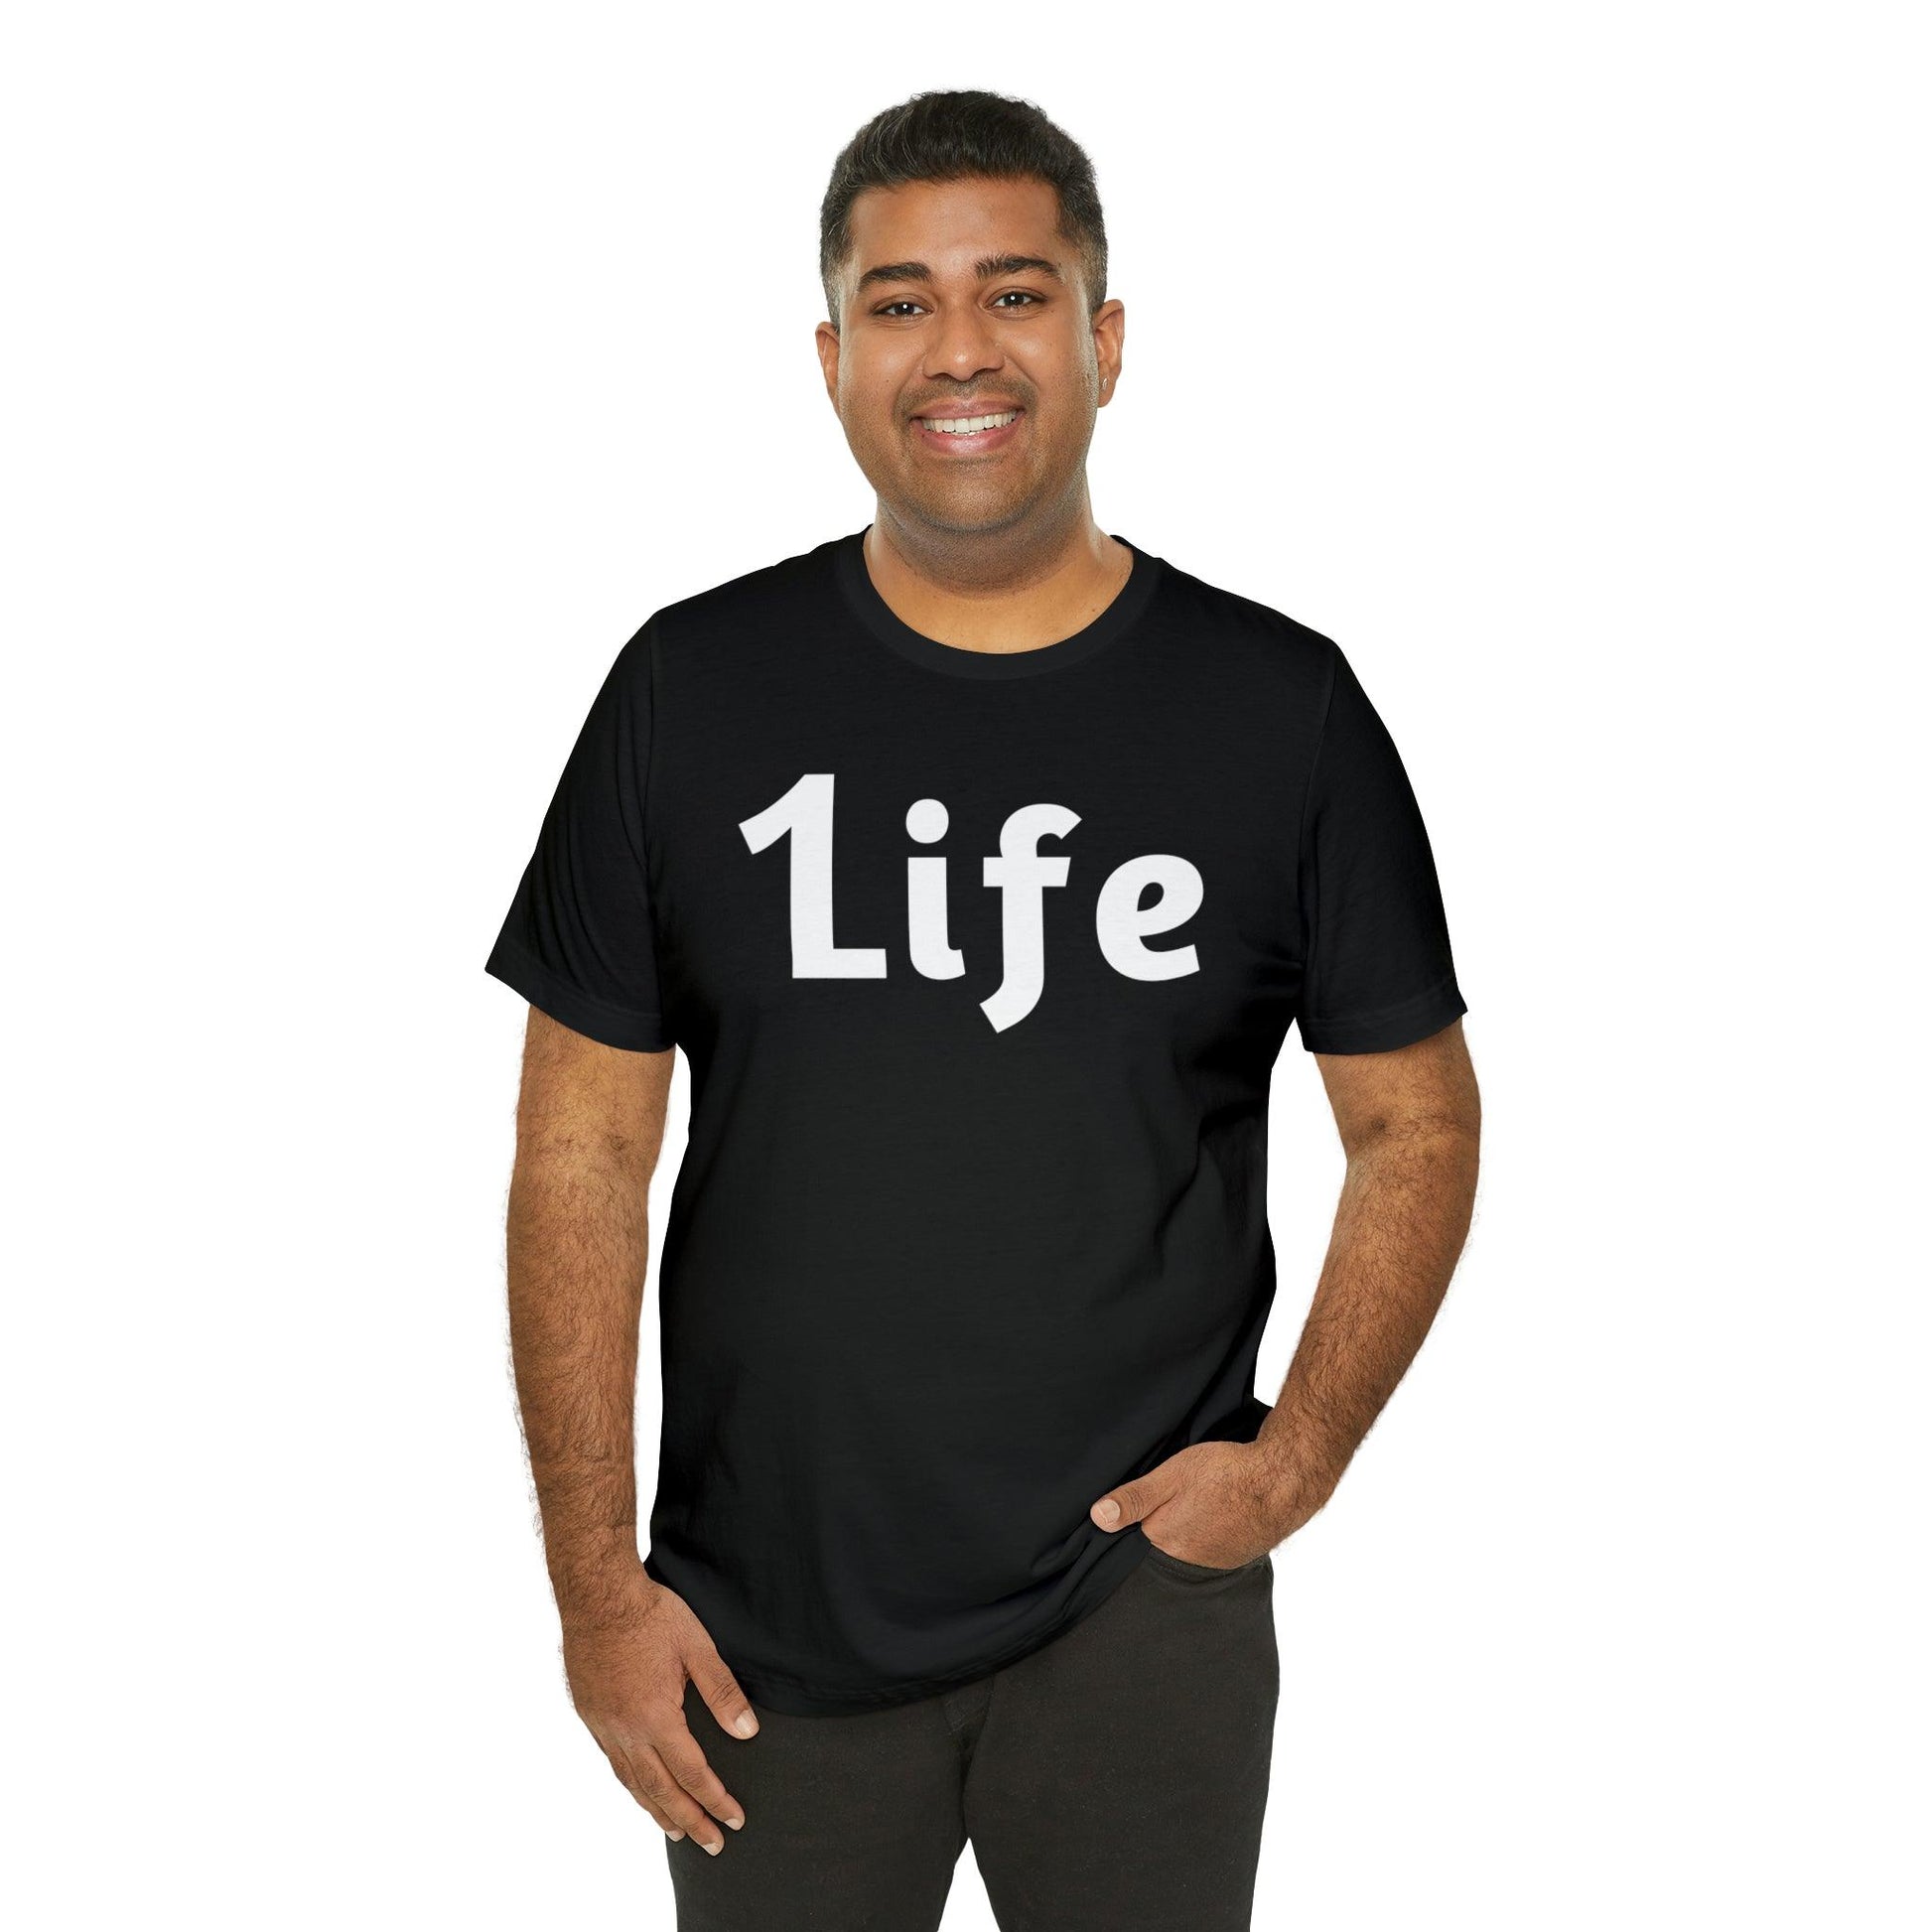 One life Shirt 1life shirt Live Your Life You Only Have One Life To Live - Giftsmojo